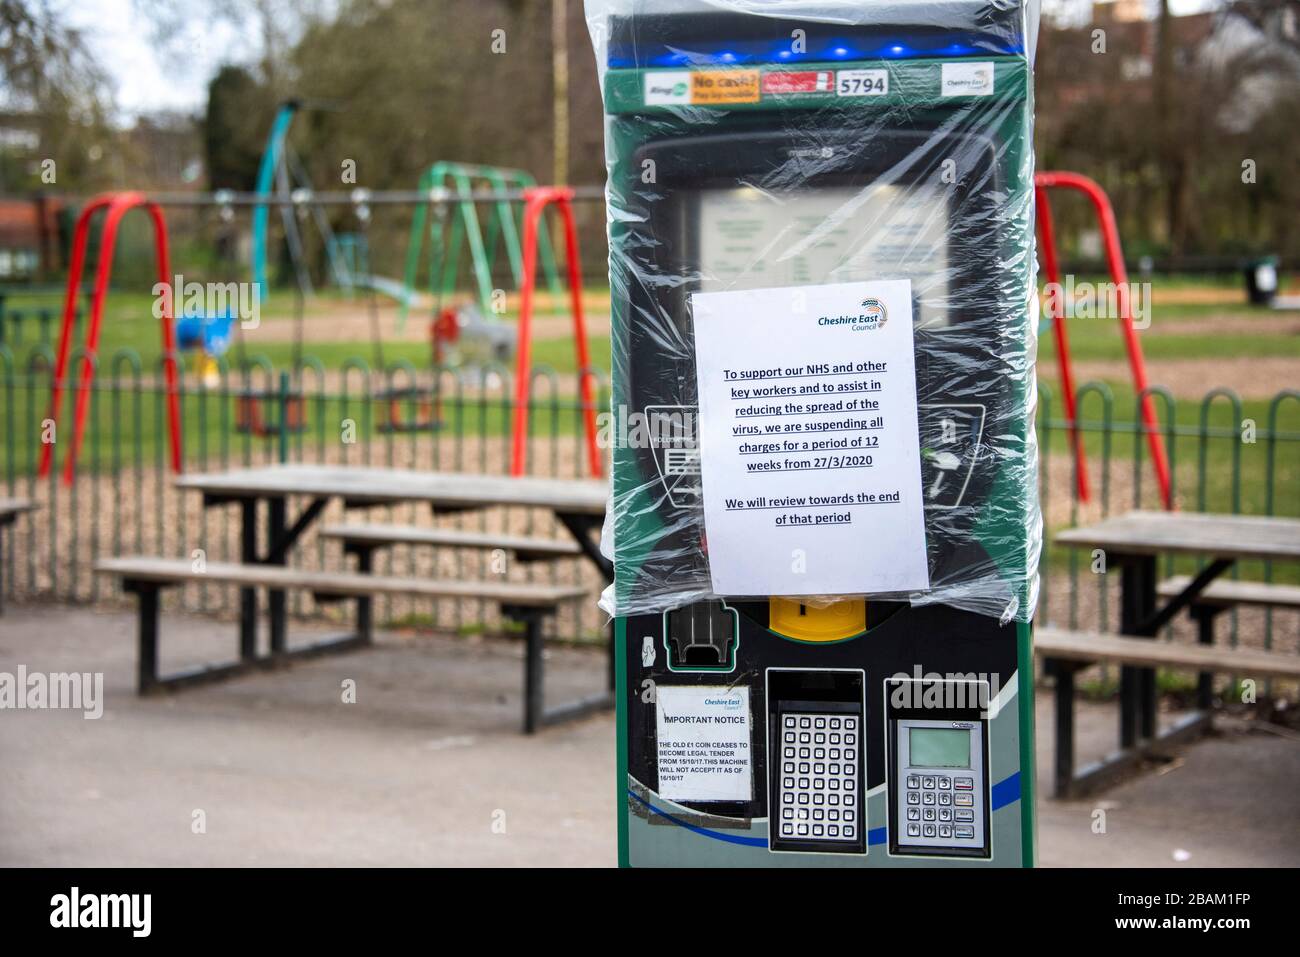 Parking meter in public park in Wilmslow, Cheshire, UK due to Coronavirus lock down on 29.03.20 to aim to reduce the spread of COVID-19 Stock Photo